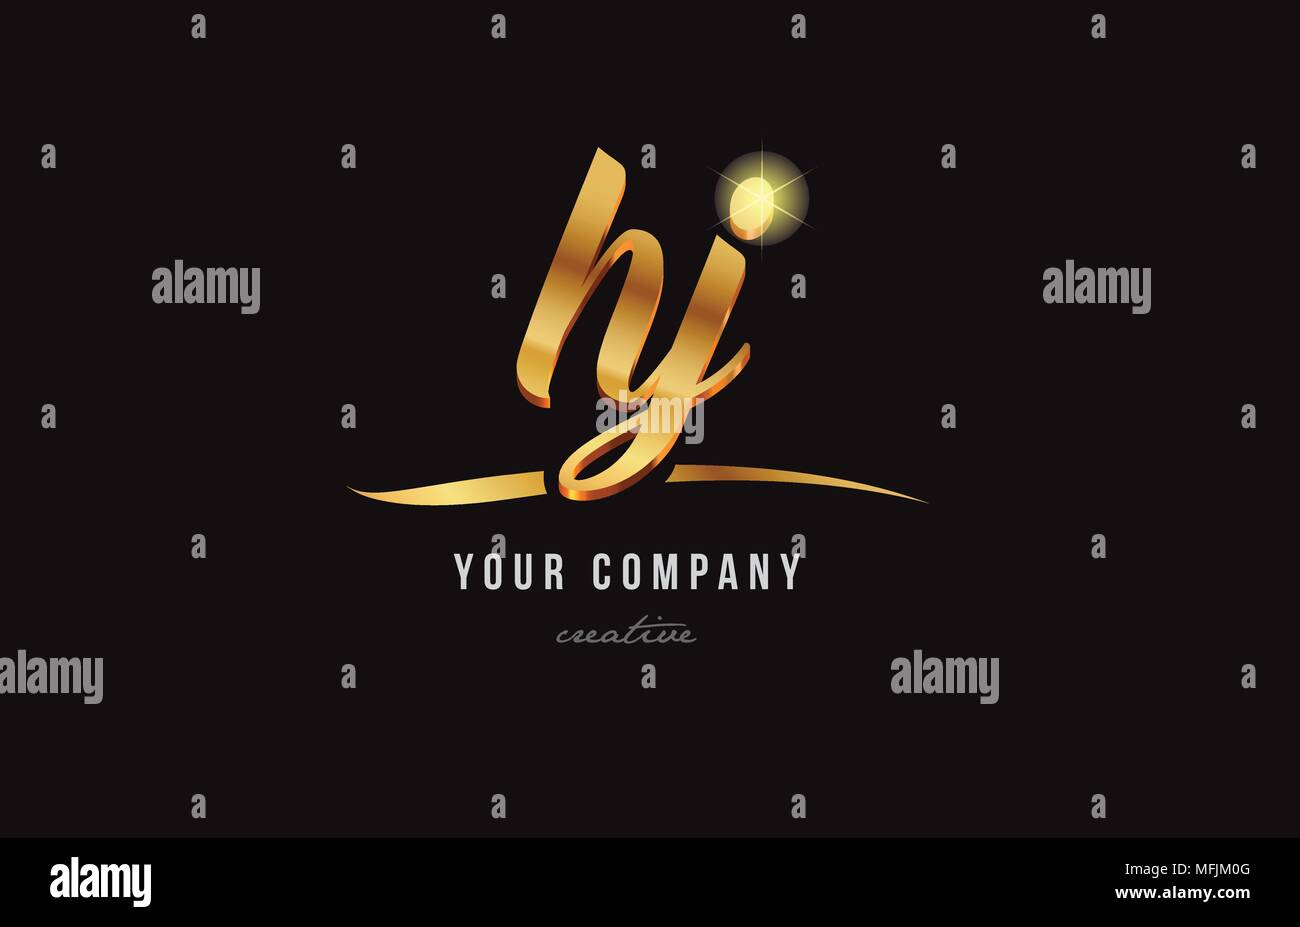 gold golden alphabet letter hy h y logo combination design suitable for a company or business Stock Vector